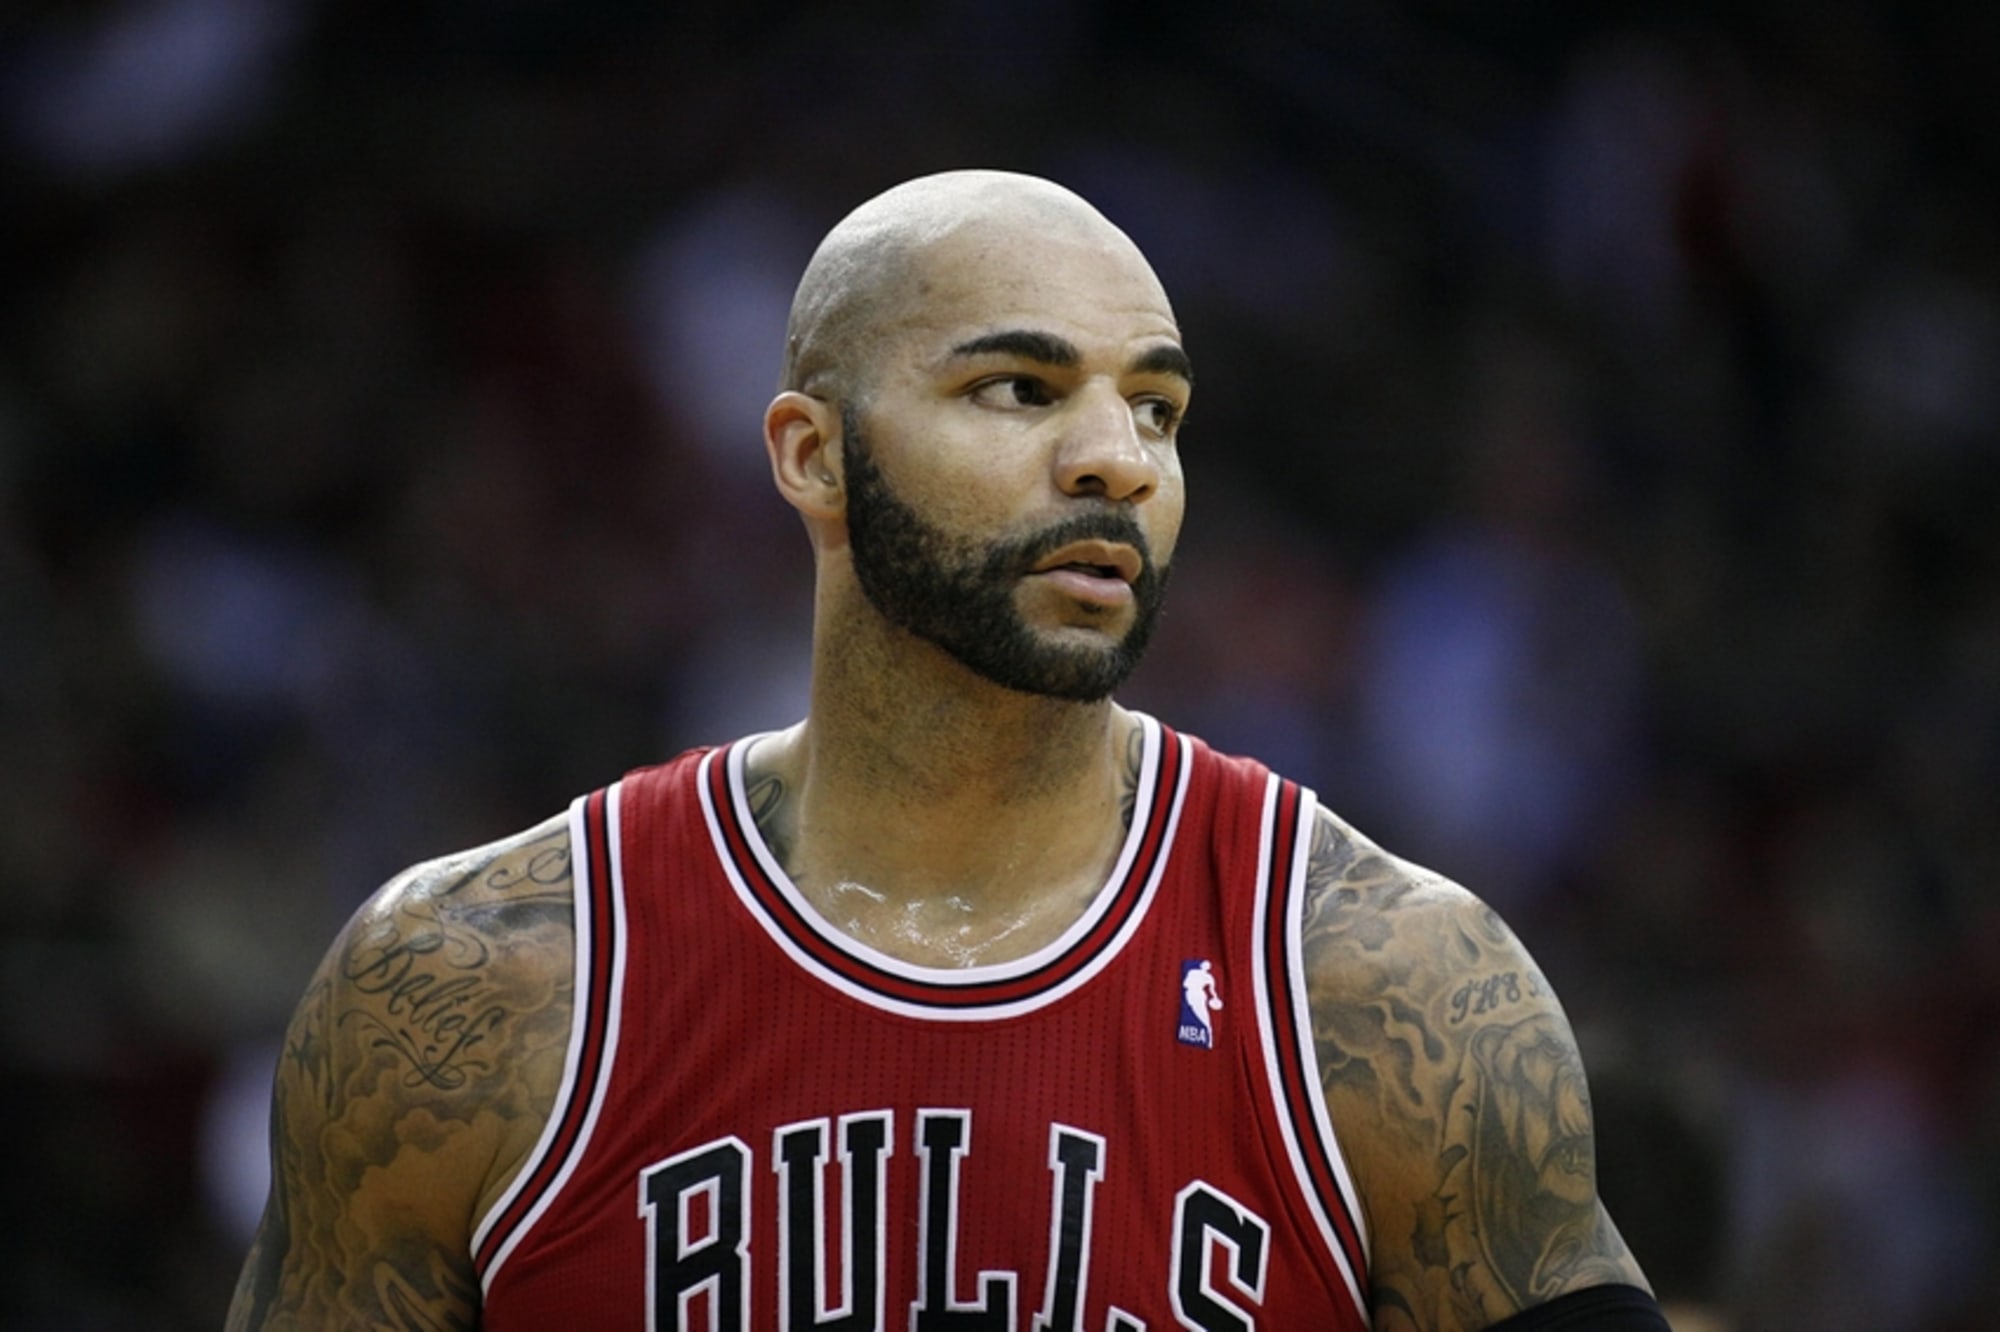 The RISE and FALL of Carlos Boozer What Happened to Him